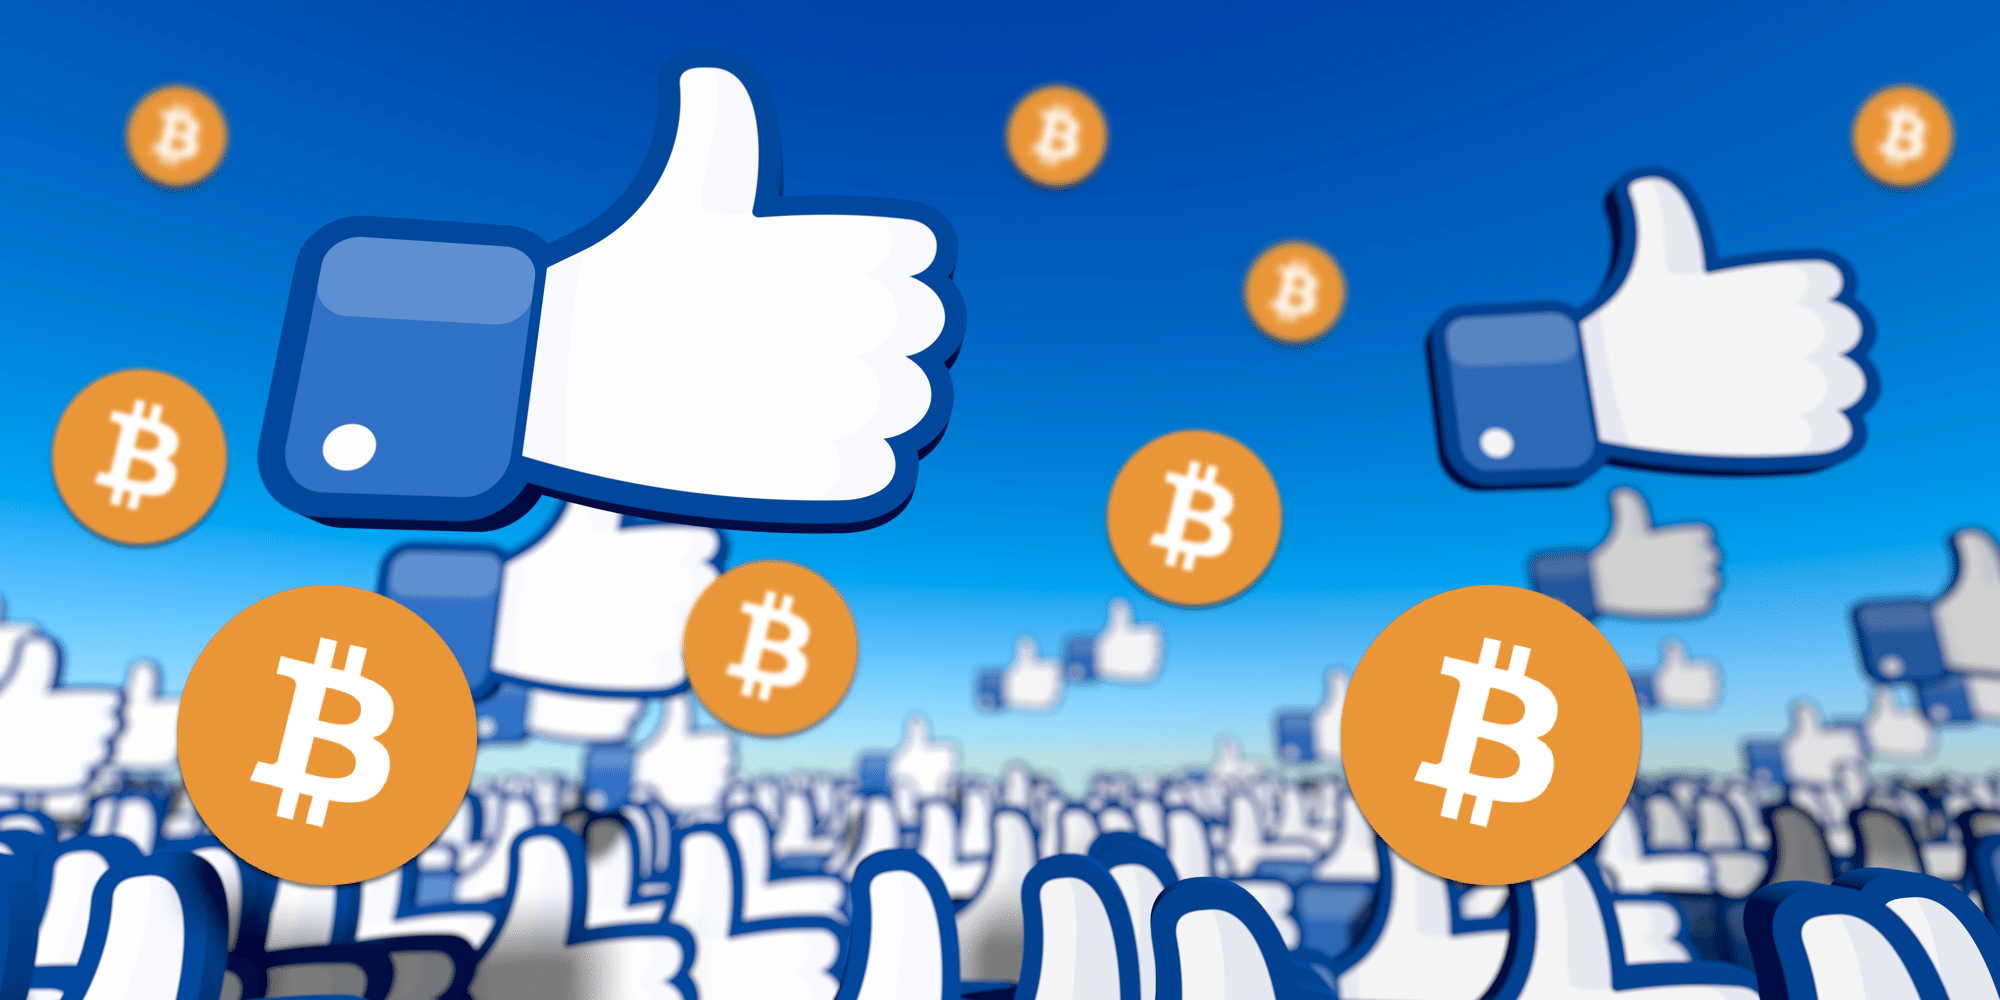 which crypto did facebook buy